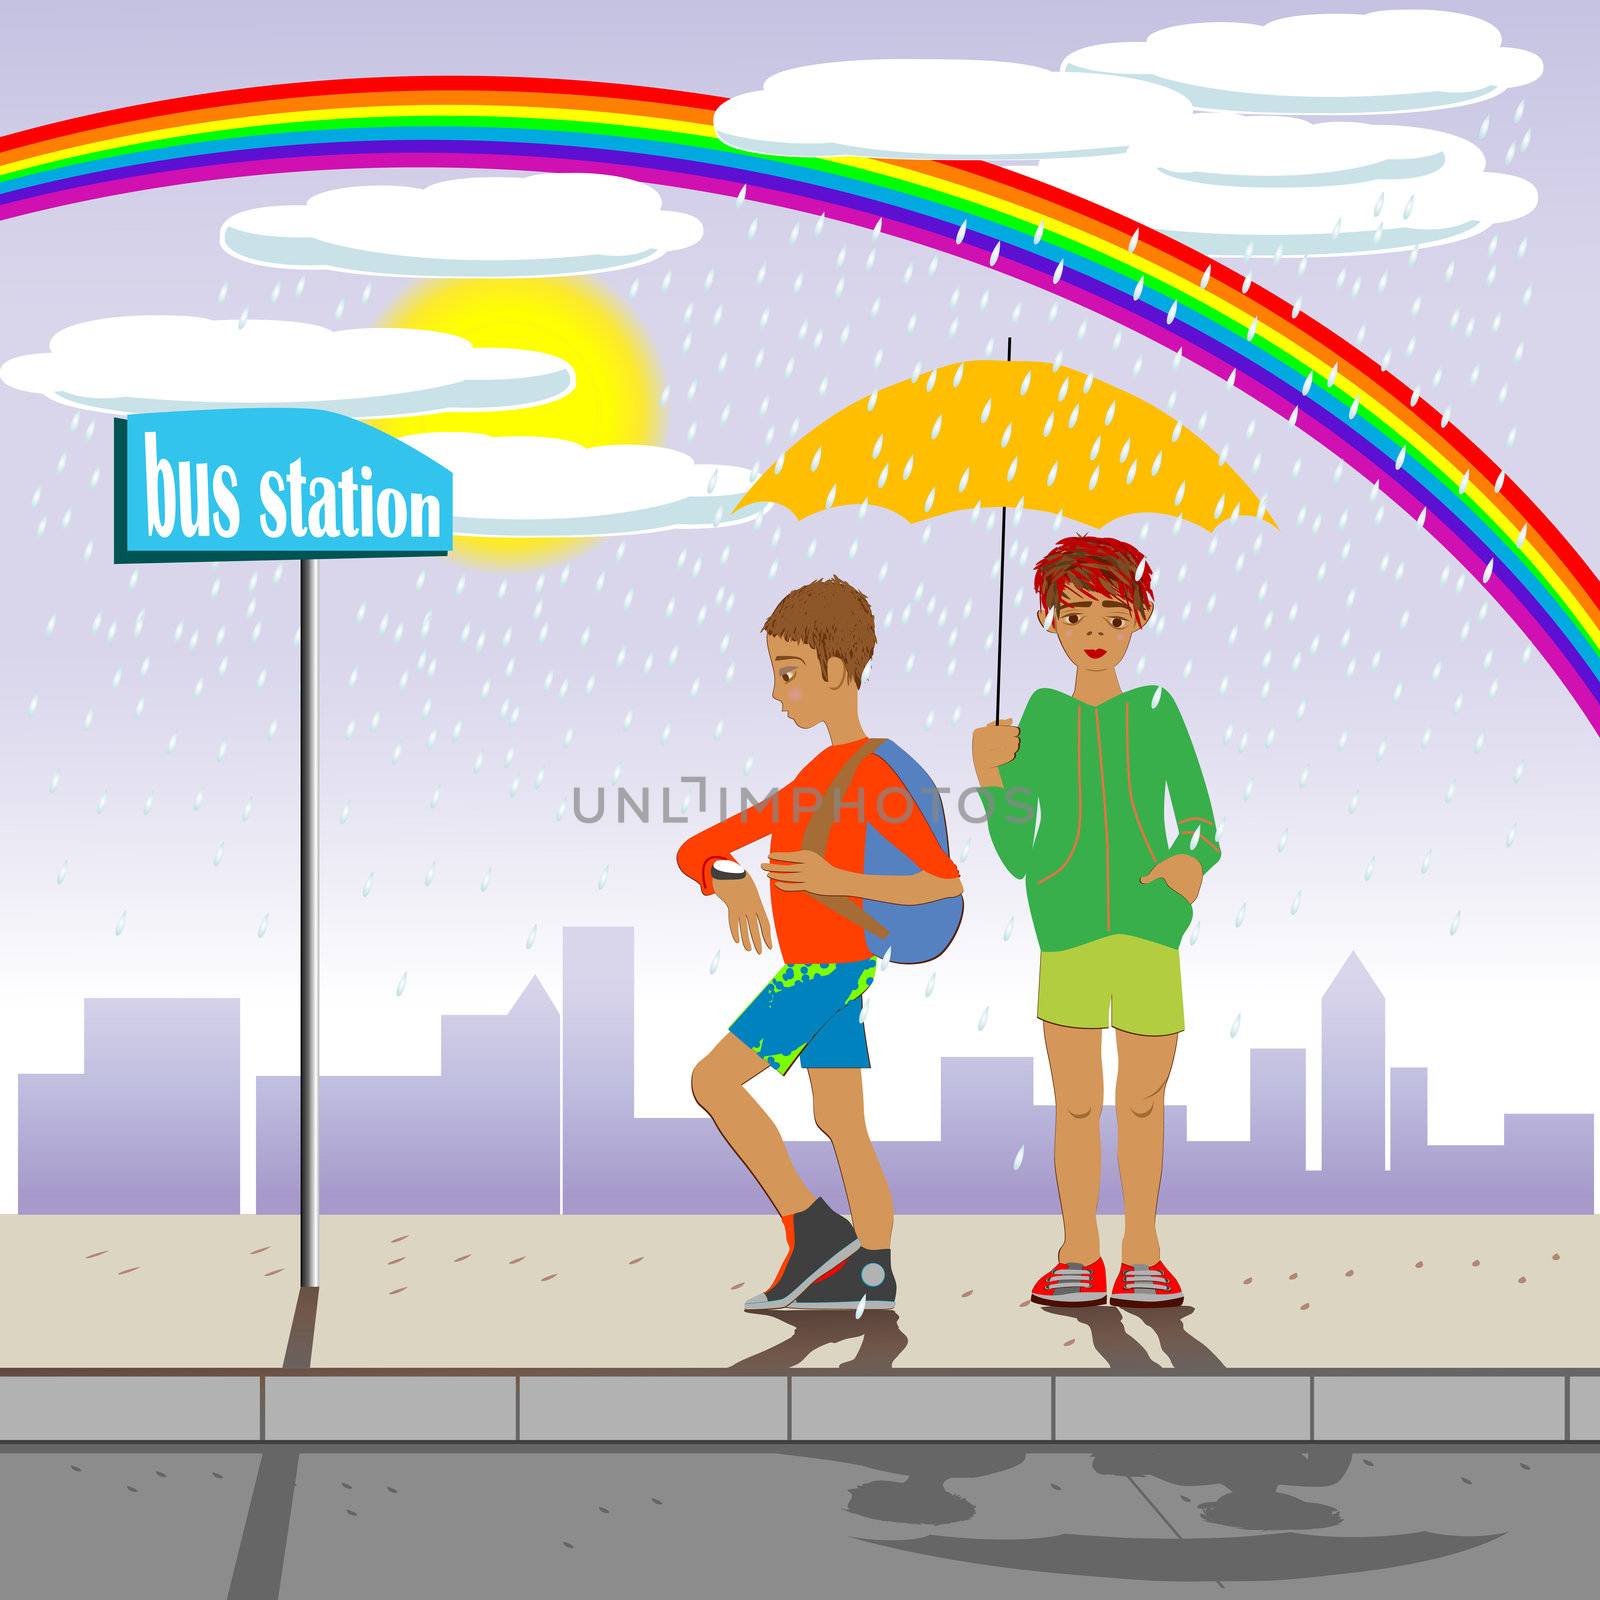 two children in the rain waiting the bus under the rainbow